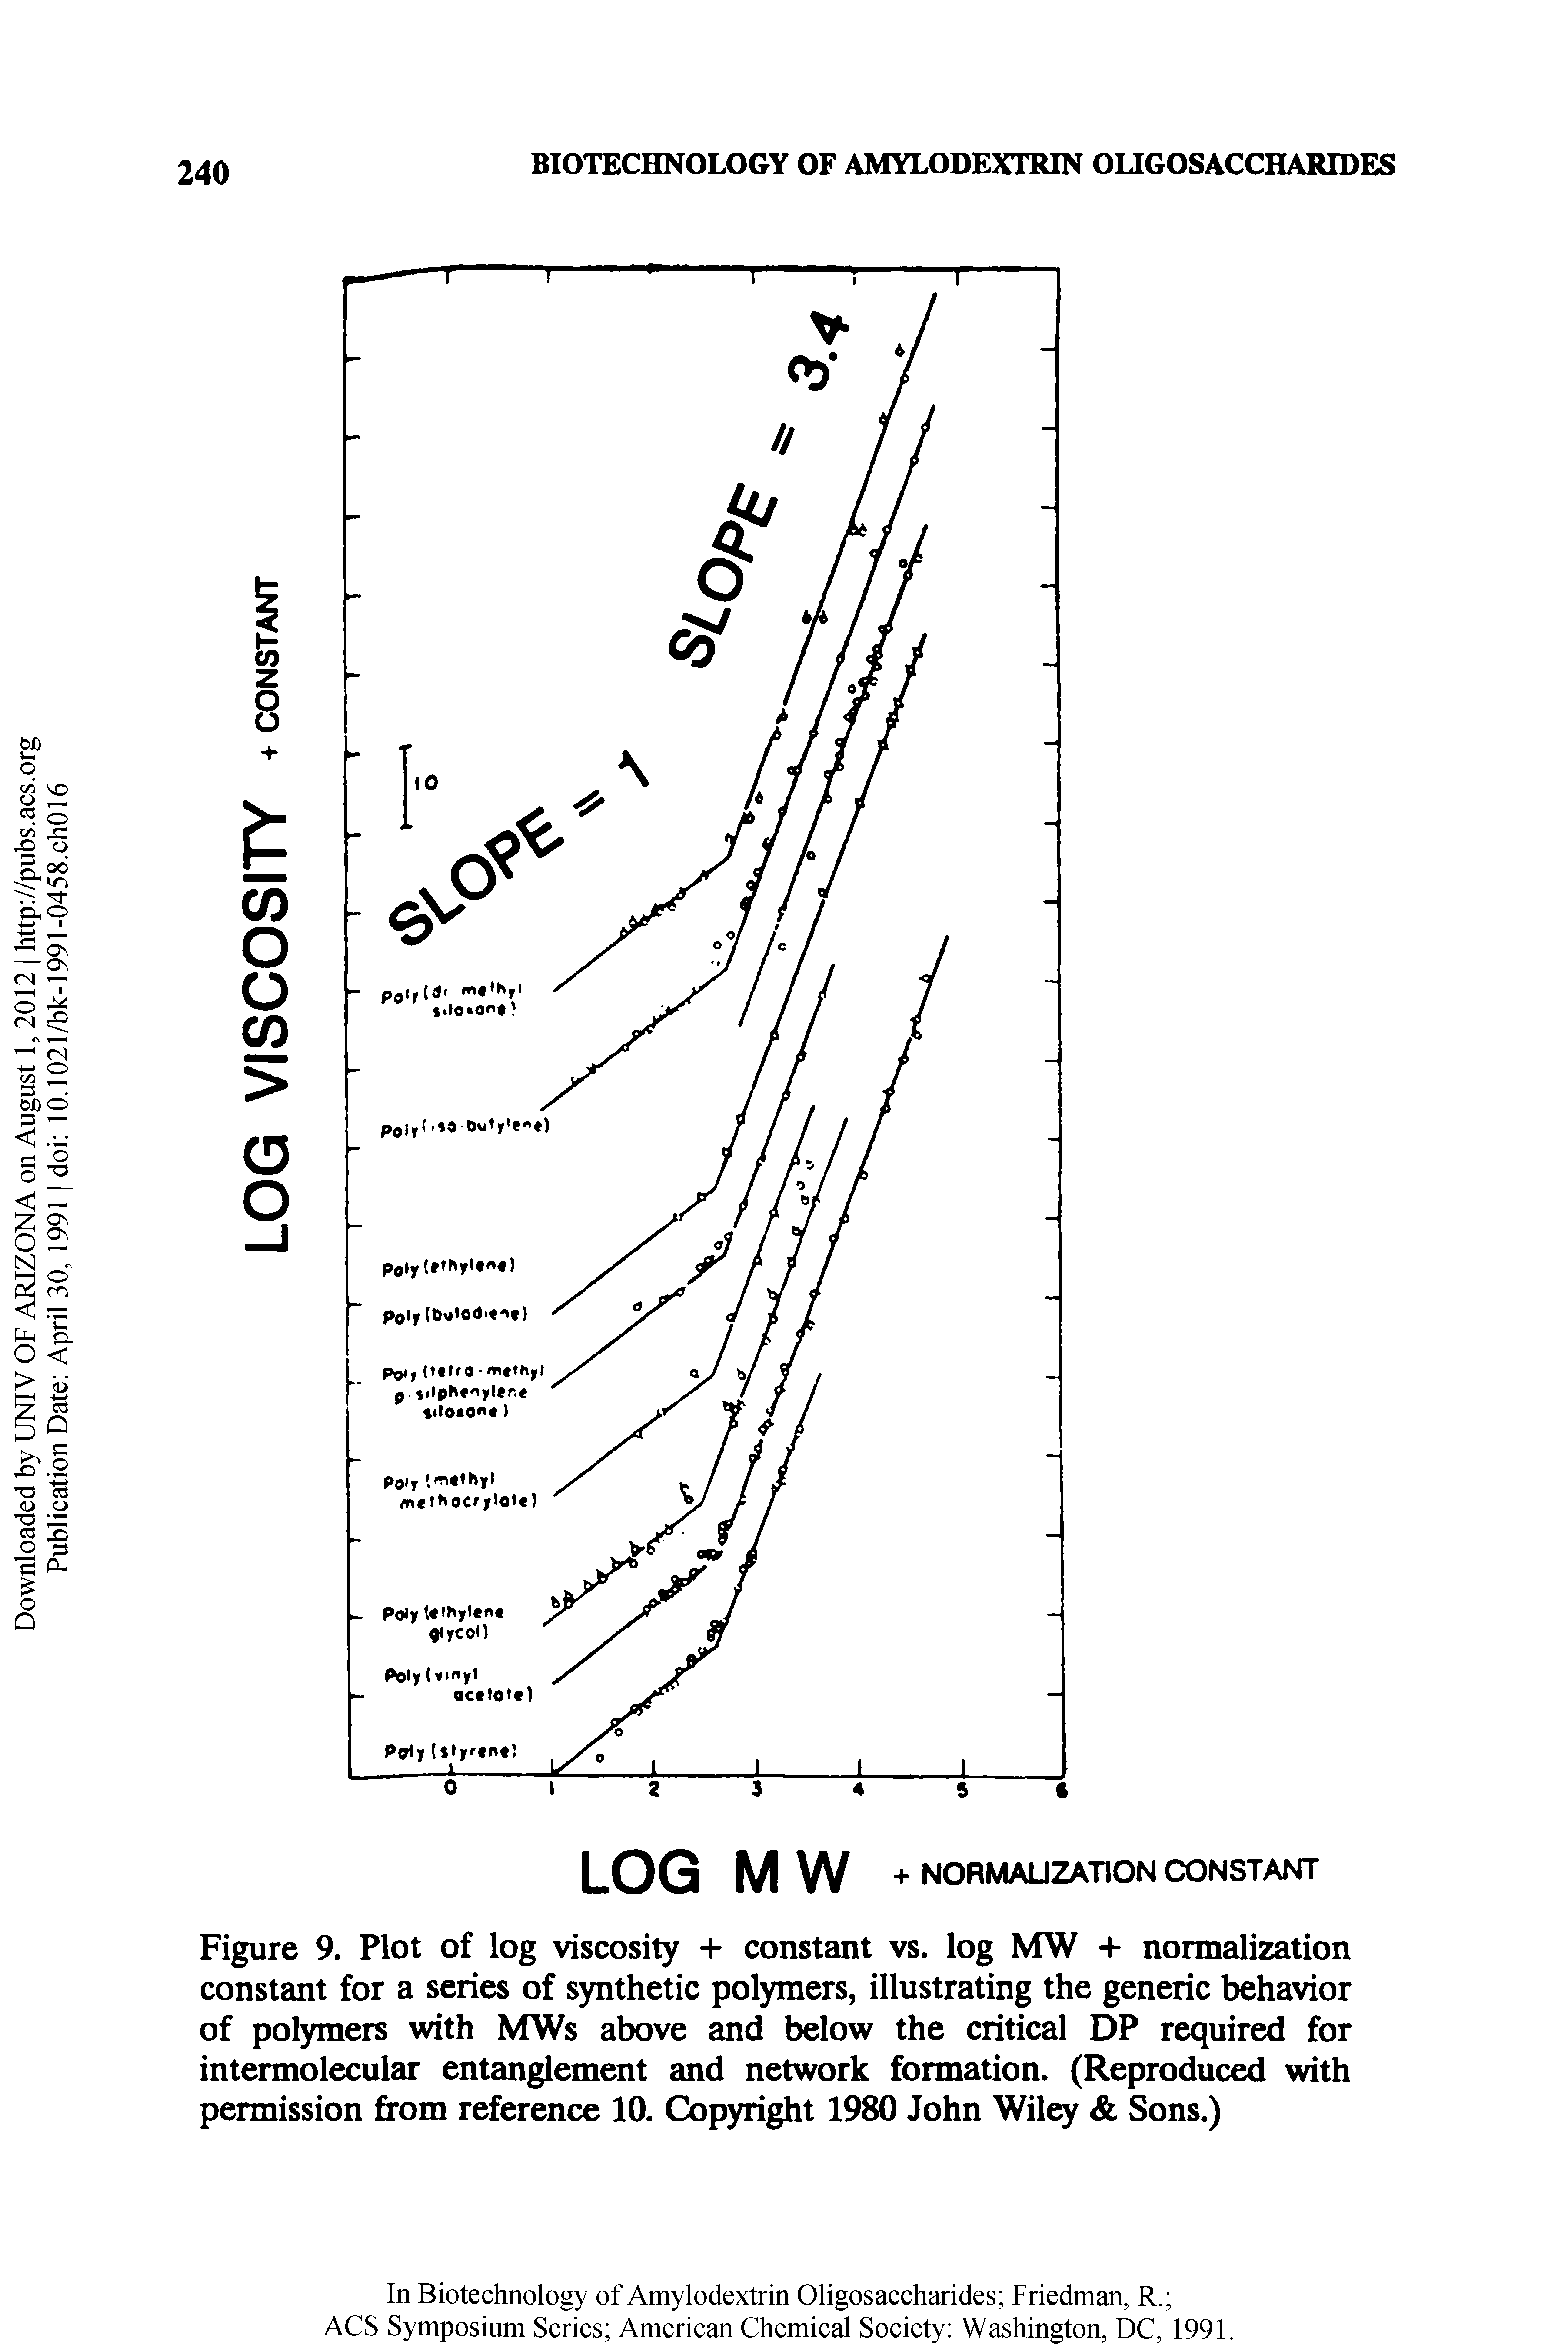 Figure 9. Plot of log viscosity + constant vs. log MW + normalization constant for a series of synthetic polymers, illustrating the generic behavior of polymers with MWs above and below the critical DP required for intermolecular entanglement and network formation. (Reproduced with permission from reference 10. Copyright 1980 John Wiley Sons.)...